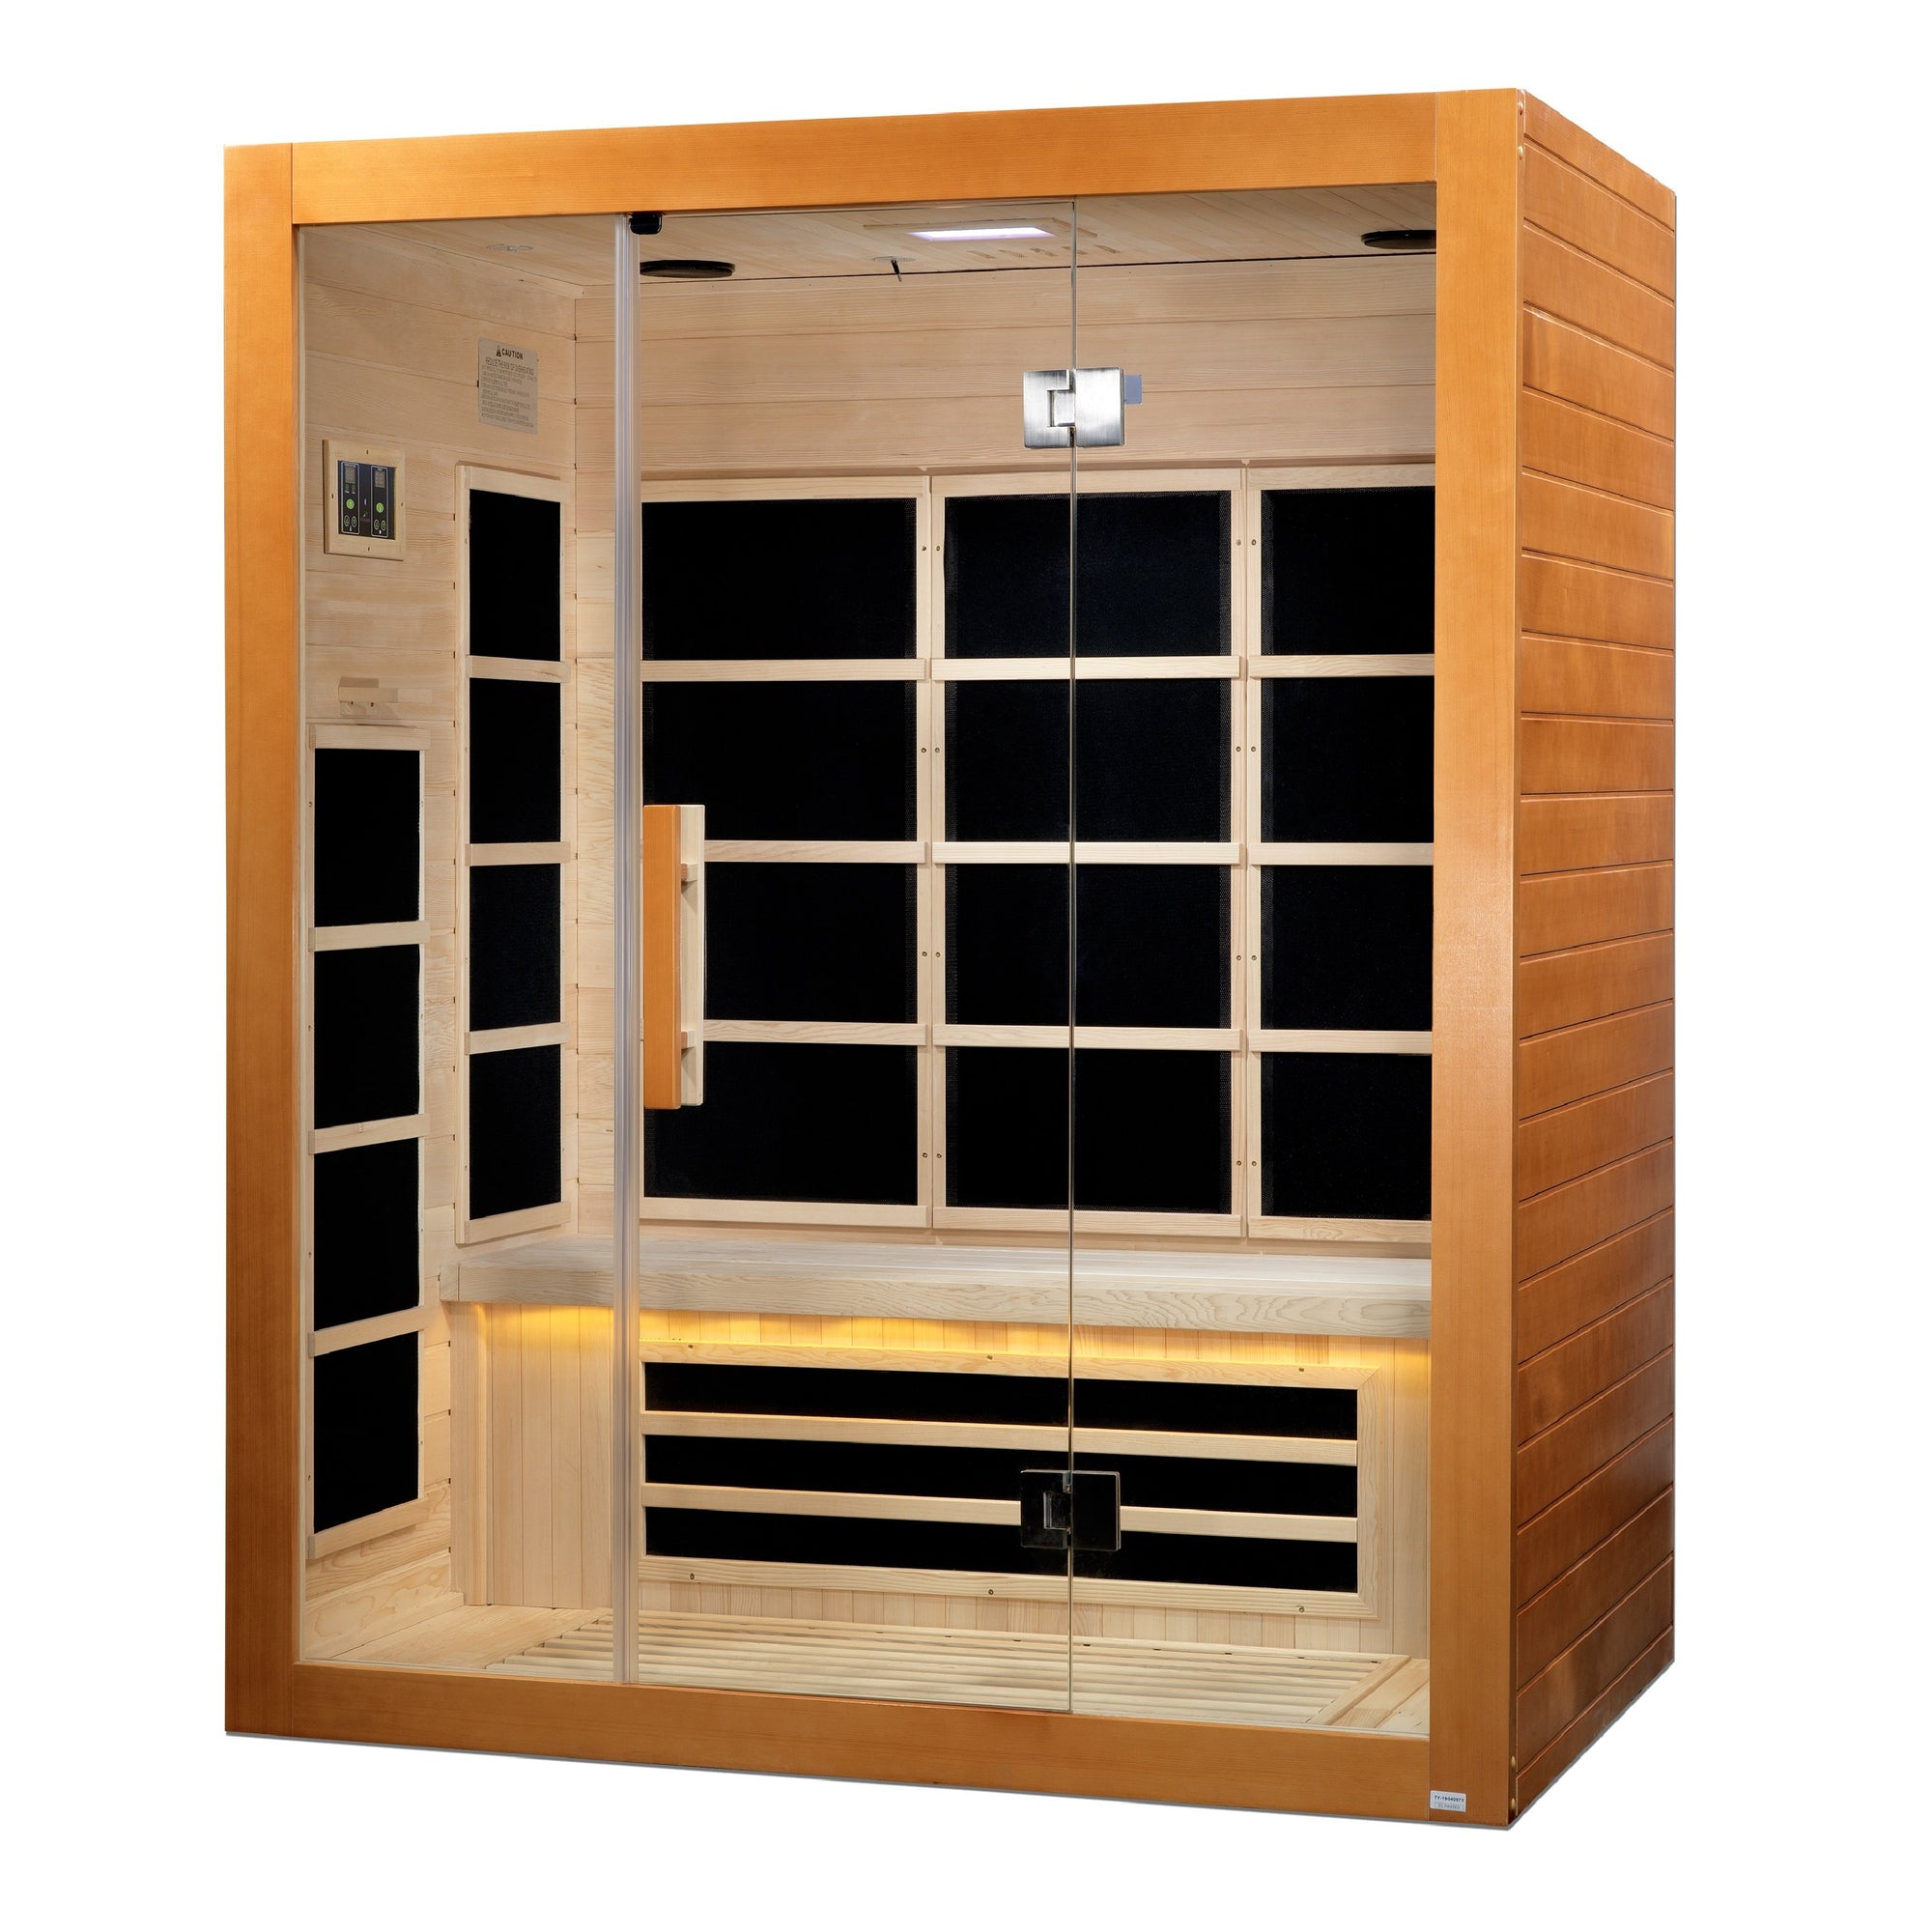 Marseille Ultra Low EMF FAR Infrared Sauna - 3 Person Natural Reforested Canadian Hemlock wood construction Roof vent with Clear tempered glass door, LED control panel and Interior reading/chromotherapy lighting system isometric view in white background